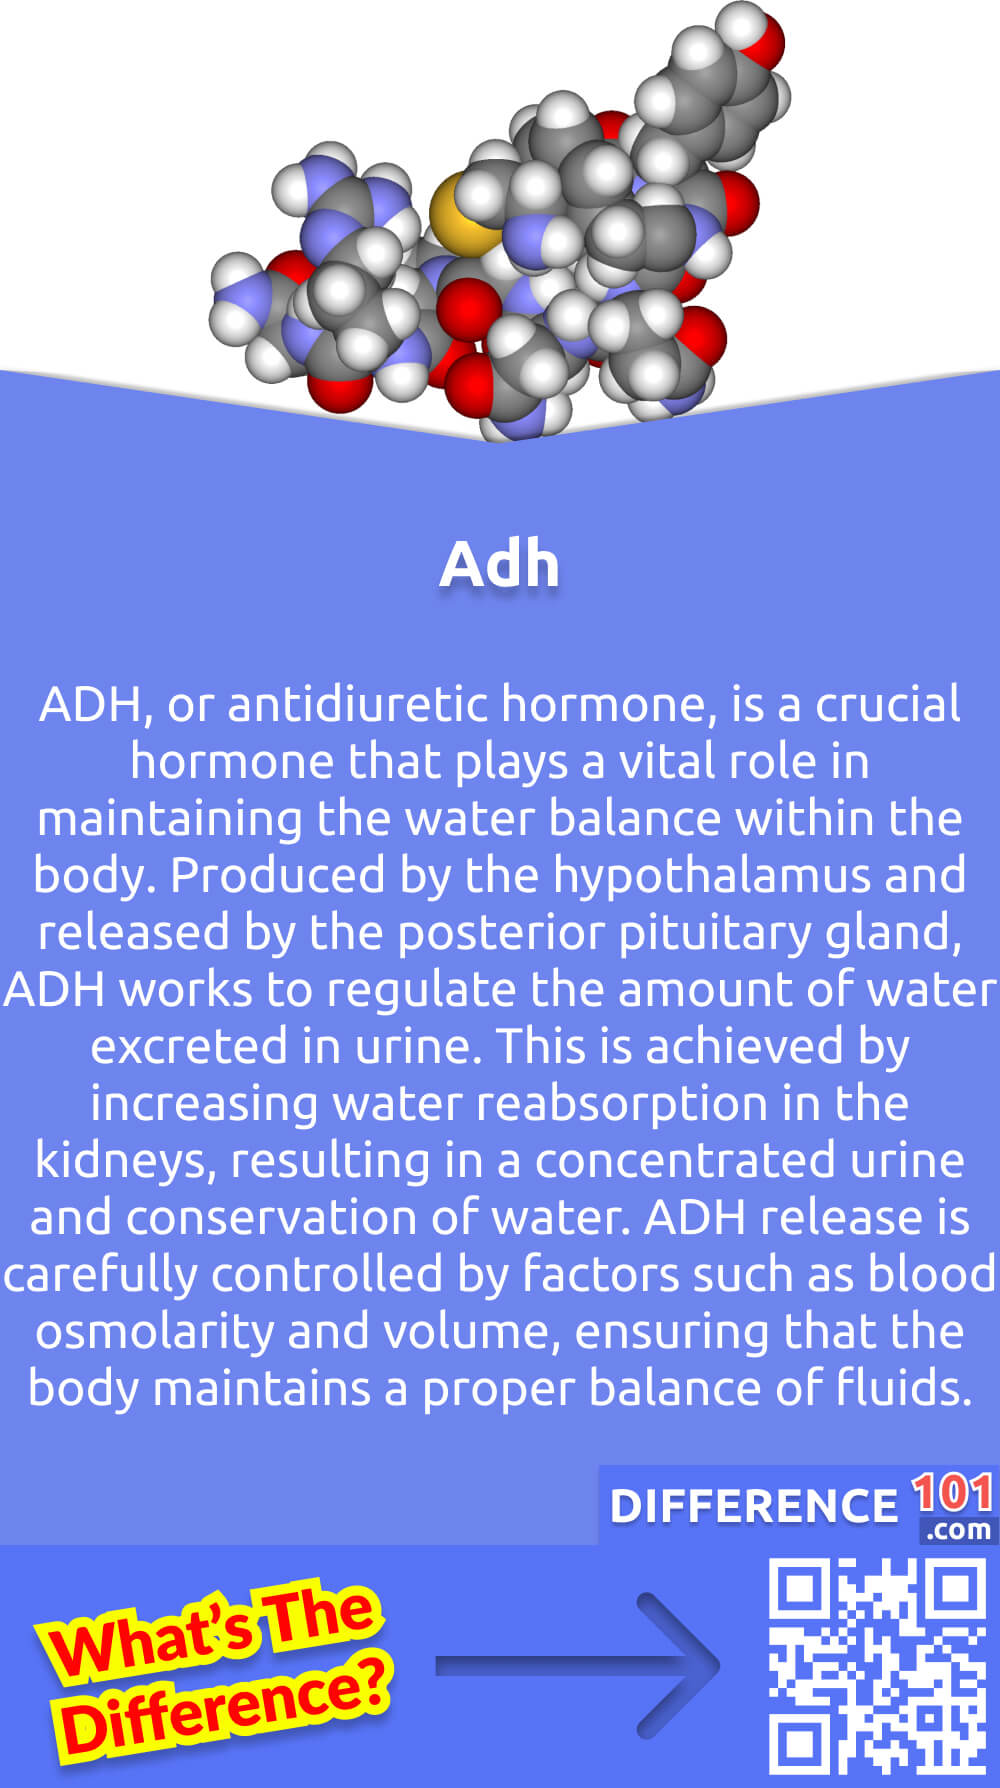 What Is Adh? ADH, or antidiuretic hormone, is a crucial hormone that plays a vital role in maintaining the water balance within the body. Produced by the hypothalamus and released by the posterior pituitary gland, ADH works to regulate the amount of water excreted in urine. This is achieved by increasing water reabsorption in the kidneys, resulting in a concentrated urine and conservation of water. ADH release is carefully controlled by factors such as blood osmolarity and volume, ensuring that the body maintains a proper balance of fluids. Its key role in conserving water makes ADH an essential hormone in situations where the body needs to preserve fluid, such as during dehydration.